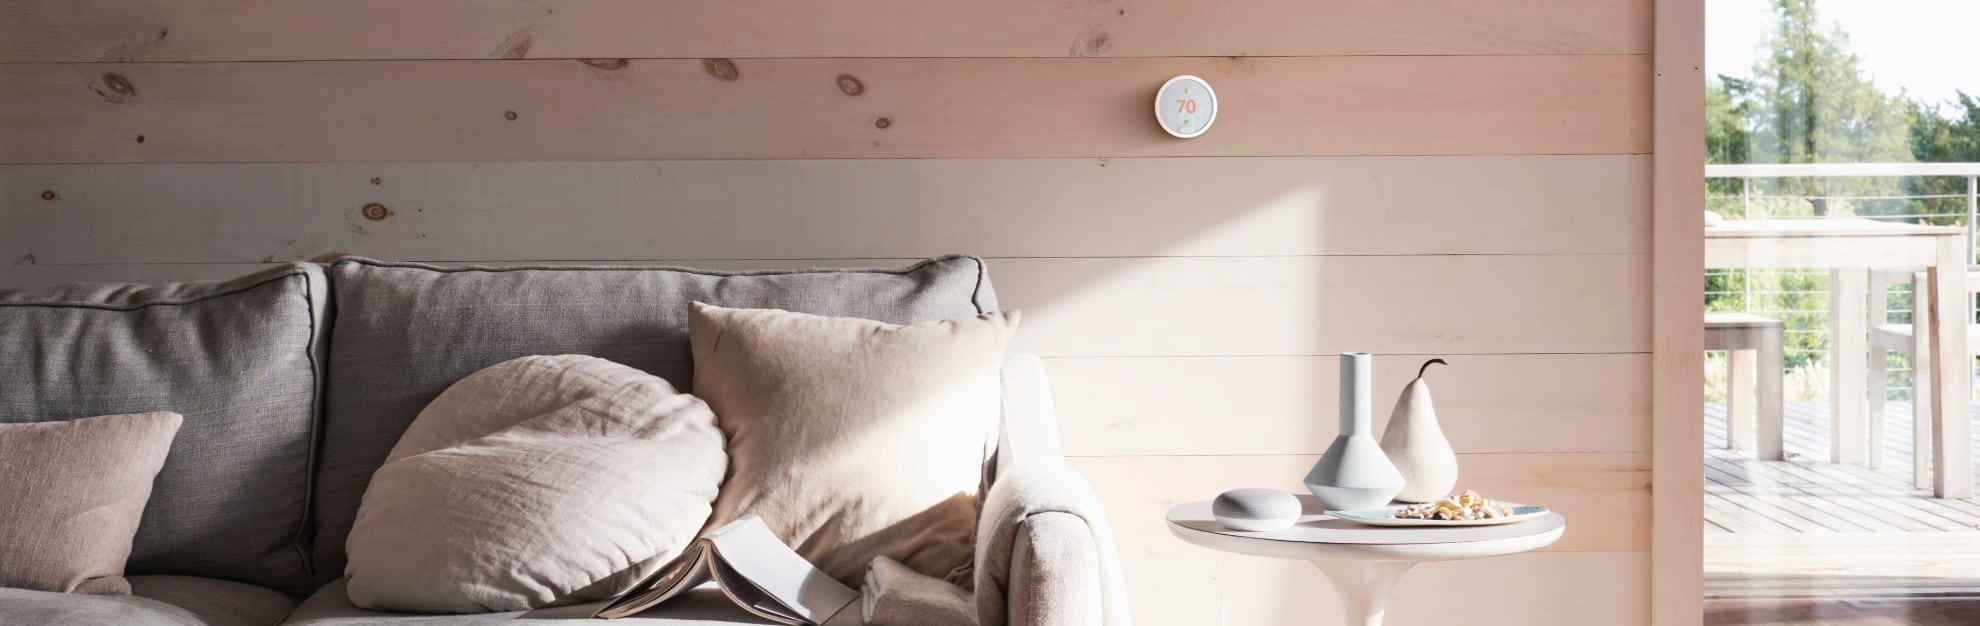 Vivint Home Automation in Greensboro